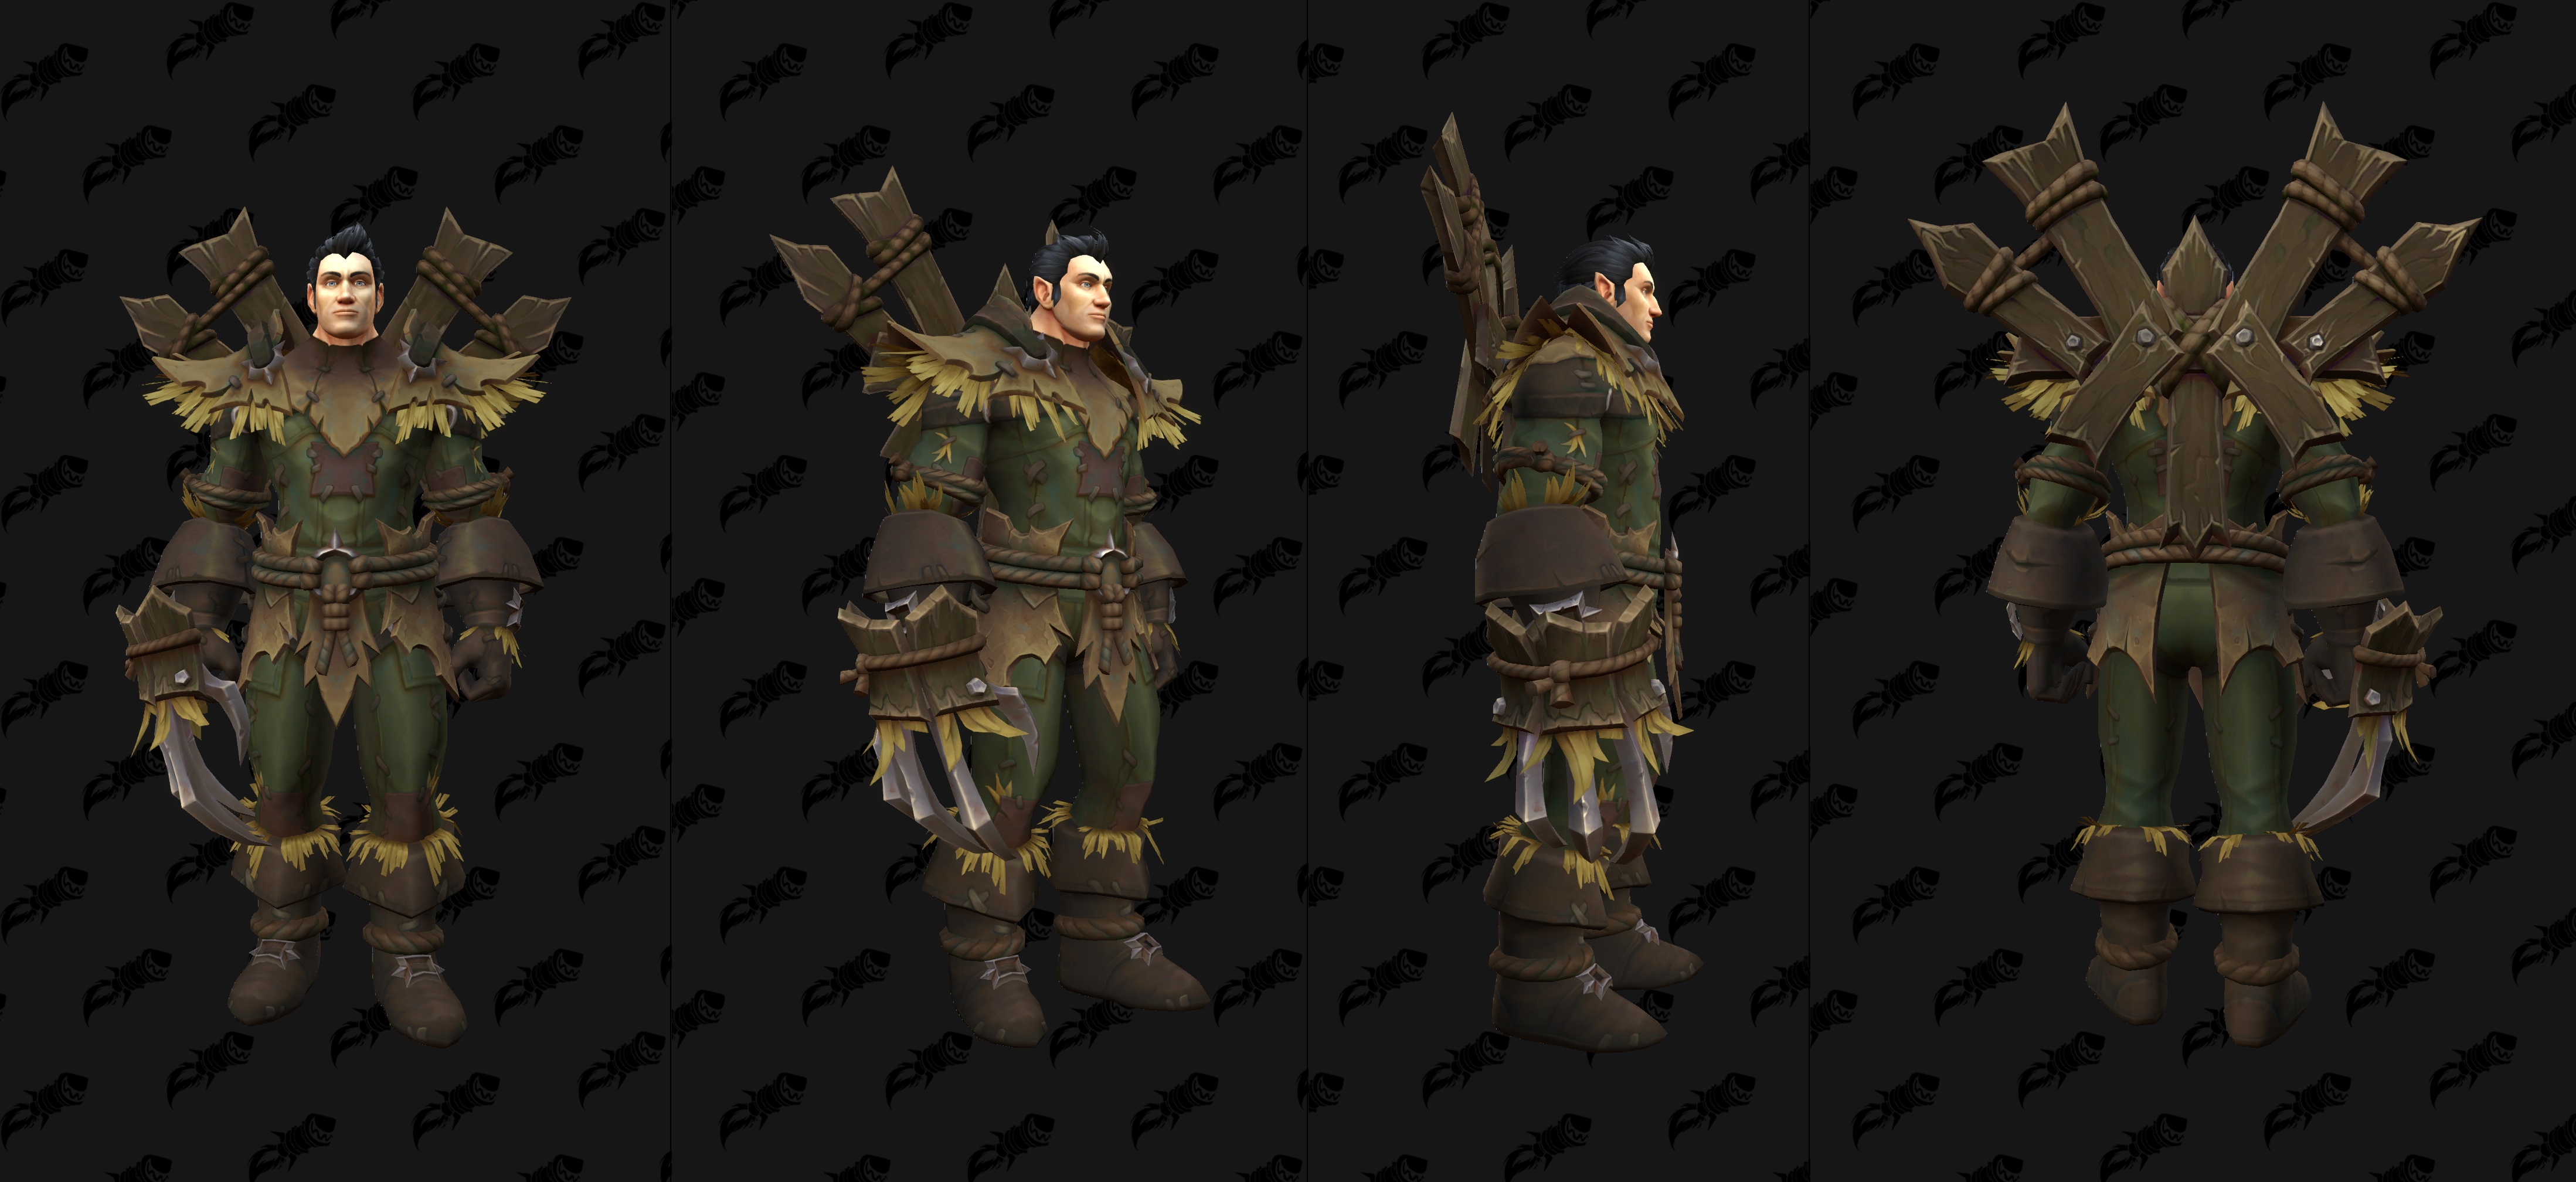 Updated Harvester Transmog Models in The War Within - Now With Back and Claw thumbnail